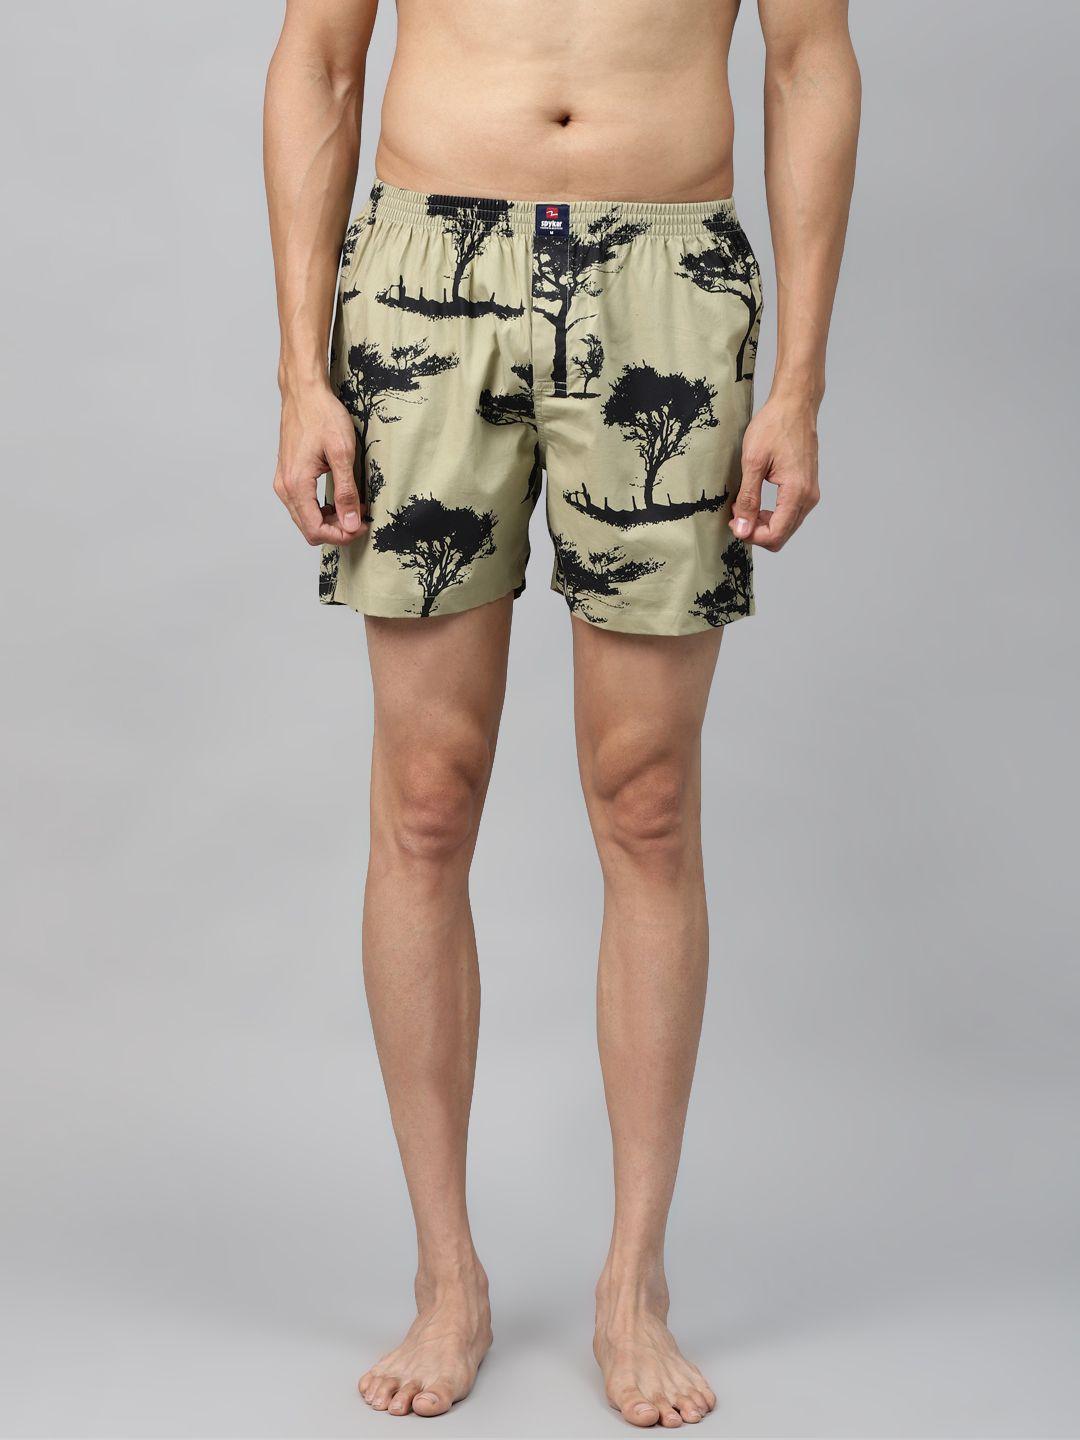 underjeans-by-spykar-men-assorted-printed-boxer